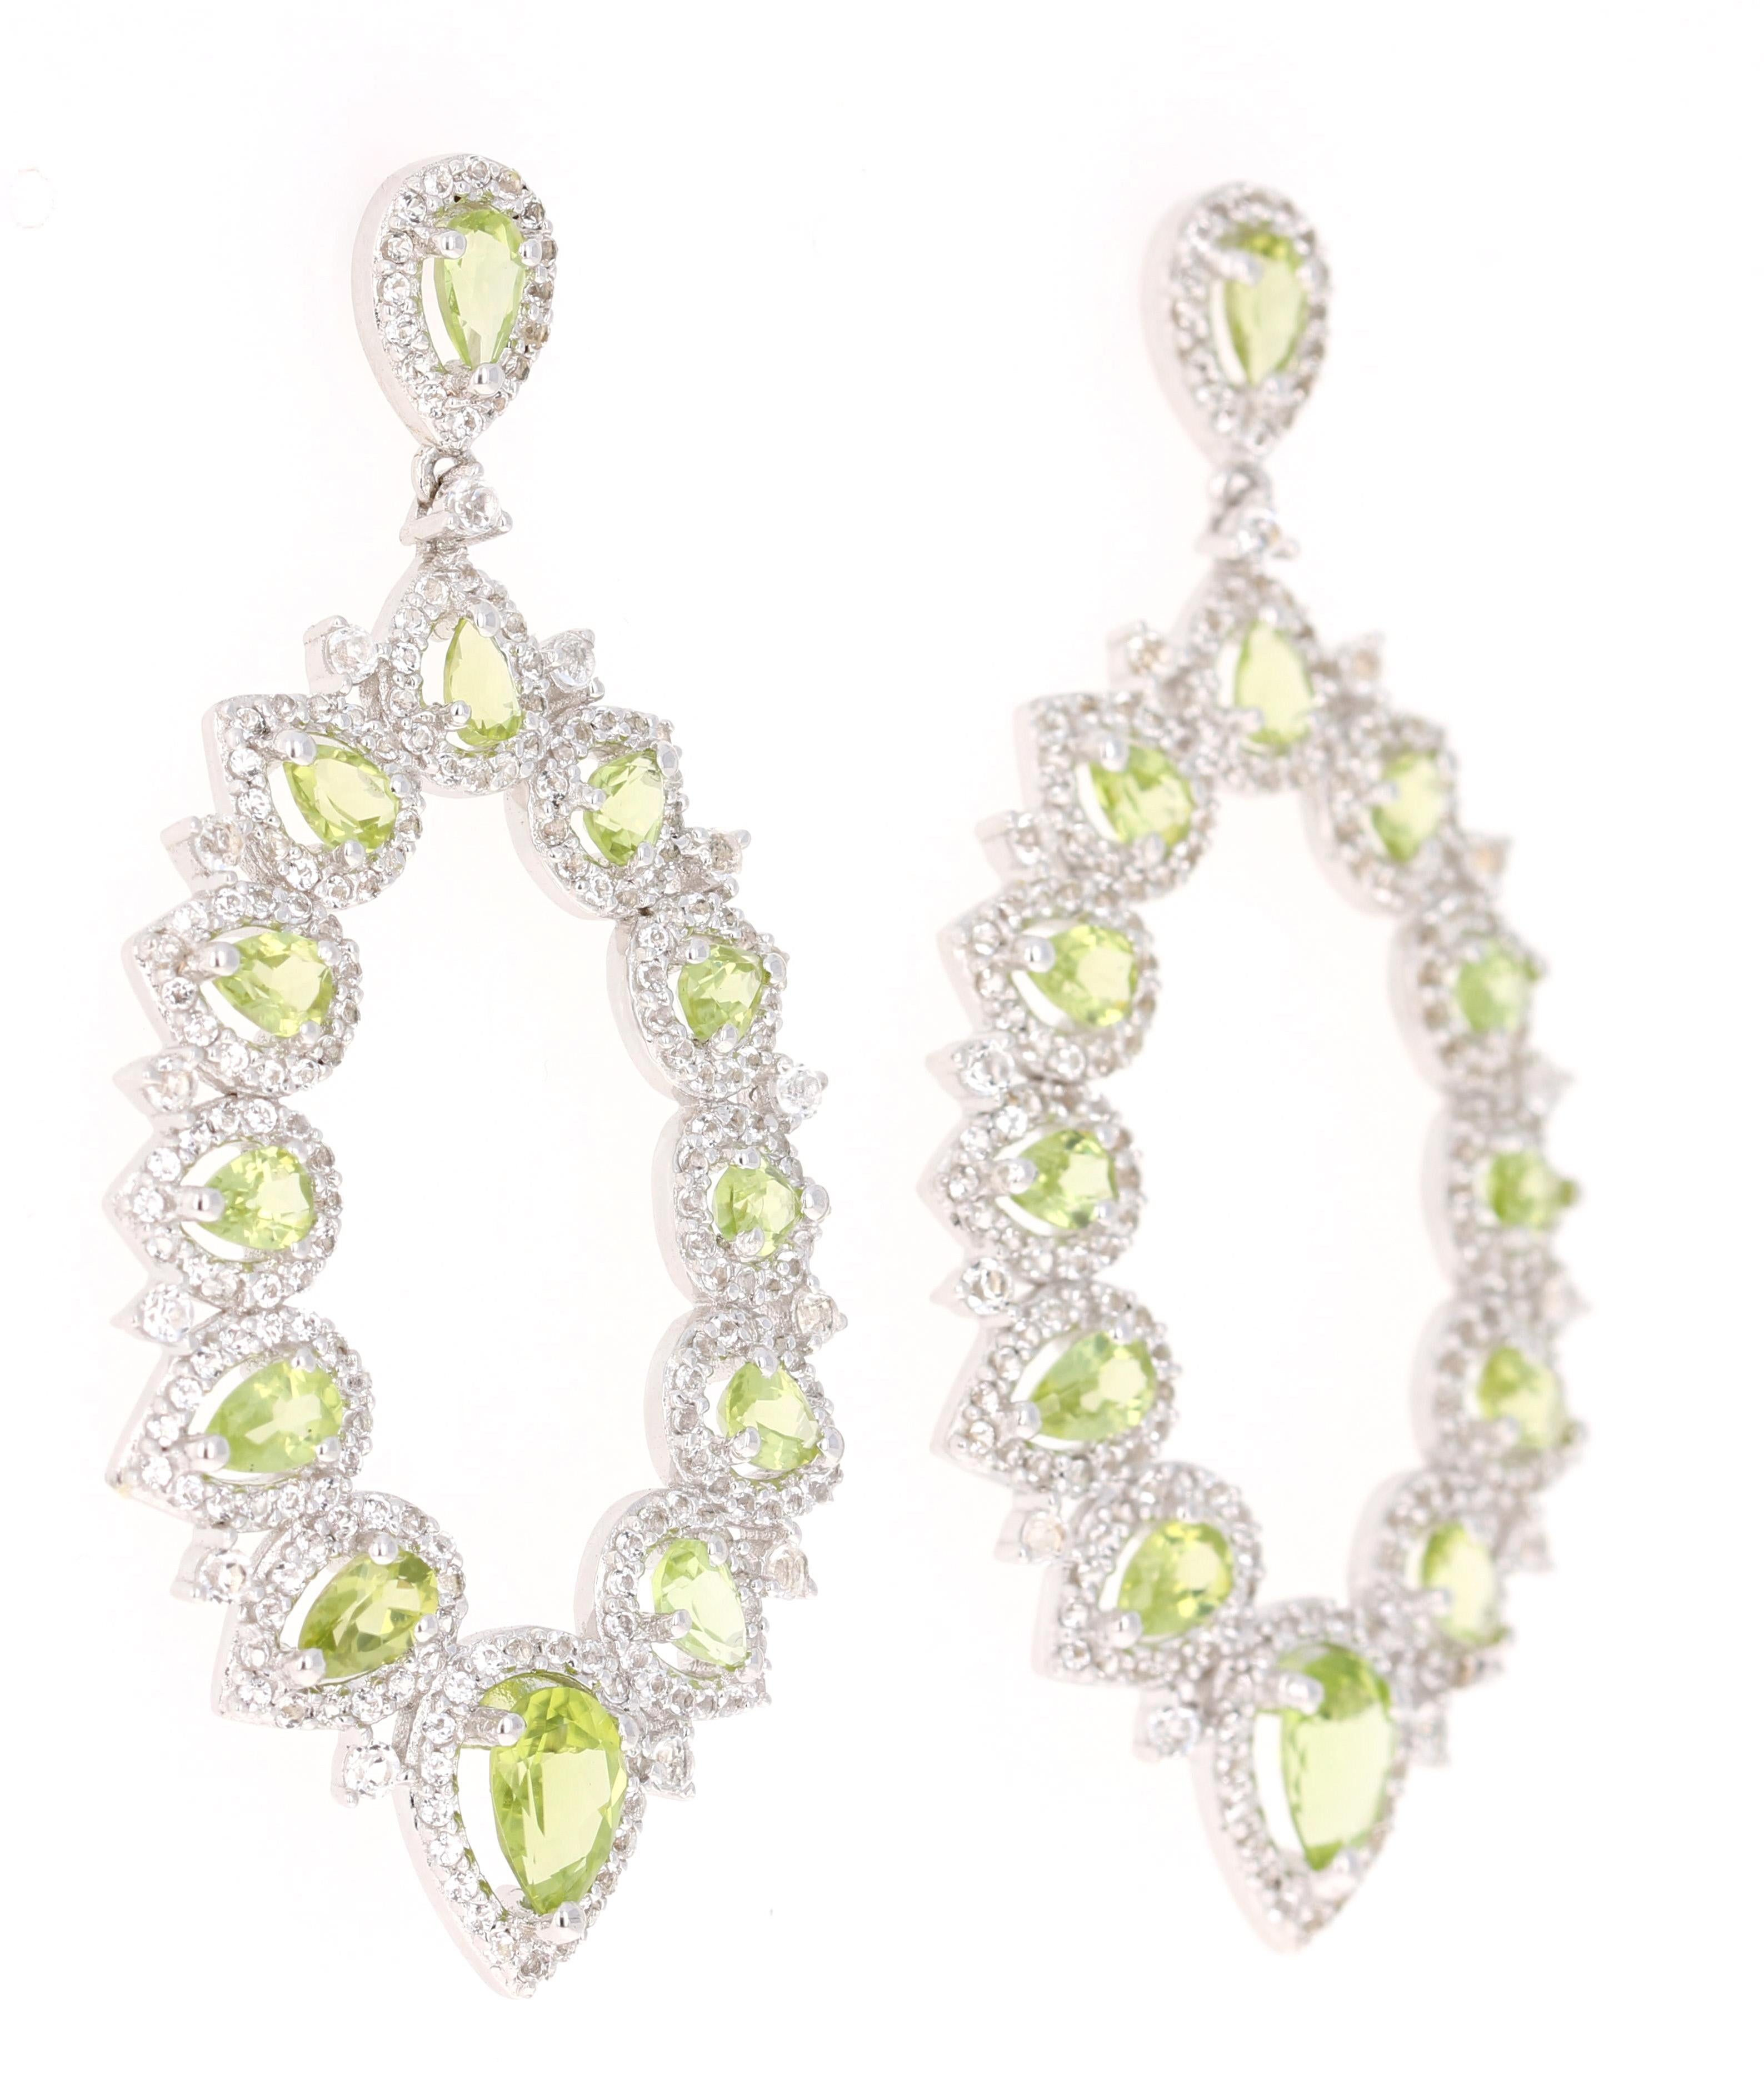 Stunning Dangle Earrings 

These earrings have 3.97 Carats of Natural Peridot and White Topaz

They are beautifully curated in 925 Silver.

They are 2 inches long. 
